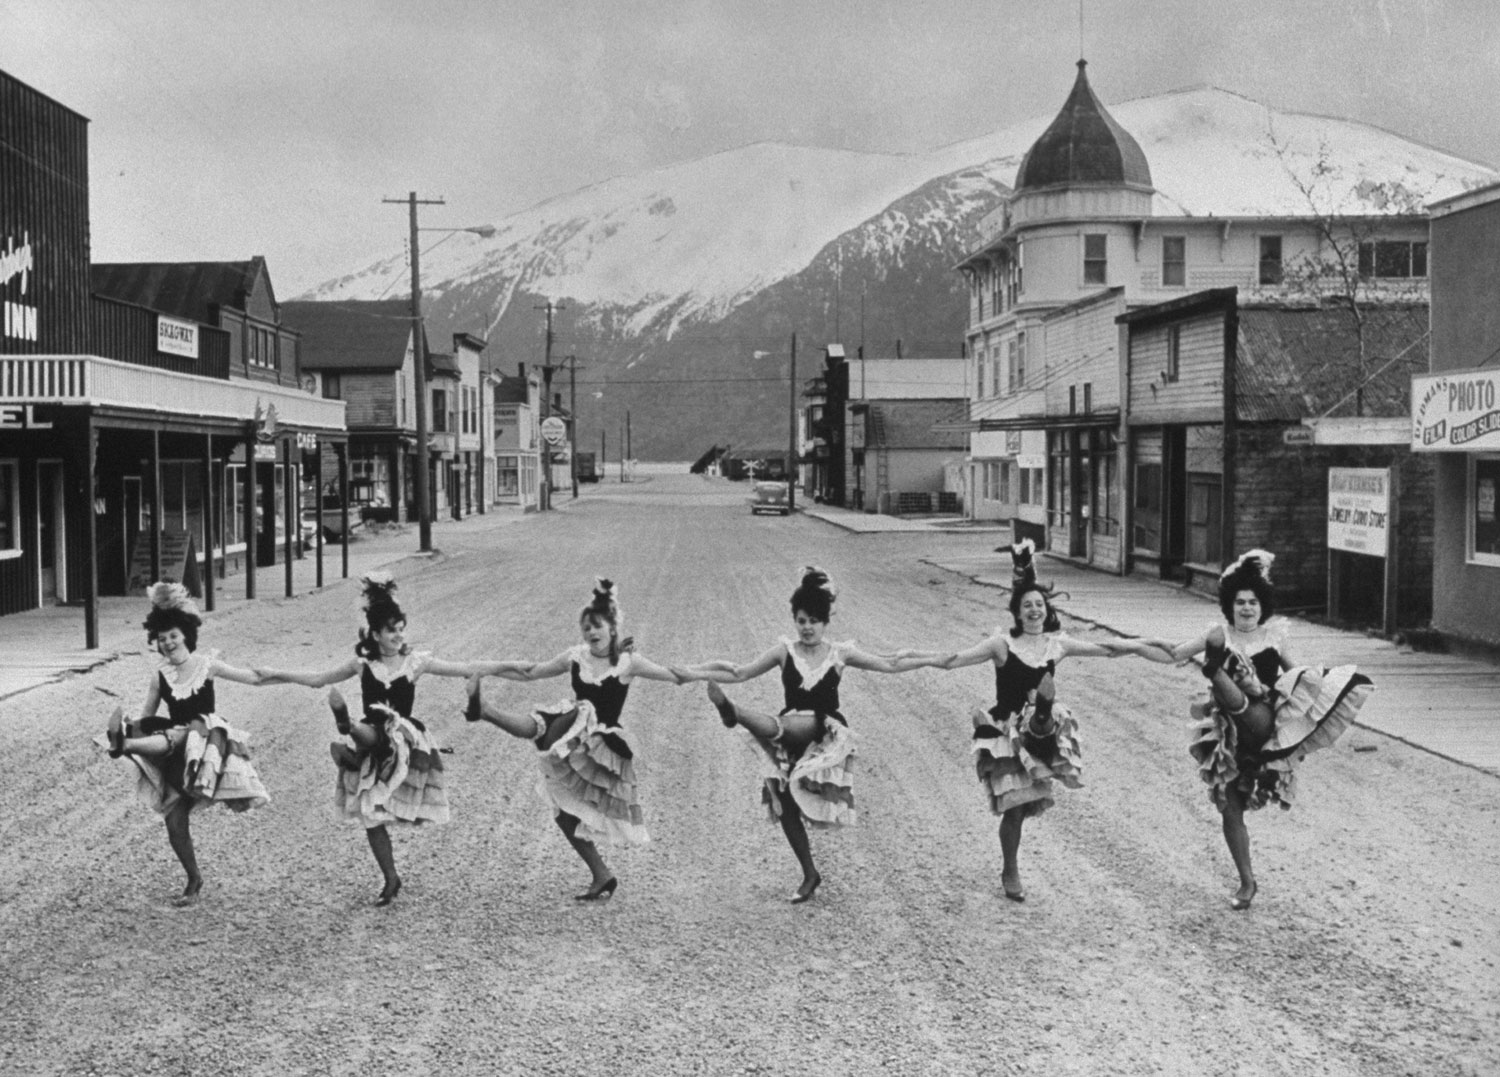 Skagway girls who dance in the Days of '98 show do the cancan in the middle of main street. The domed Golden North Hotel and false-front buildings date back to Klondike gold-rush days.